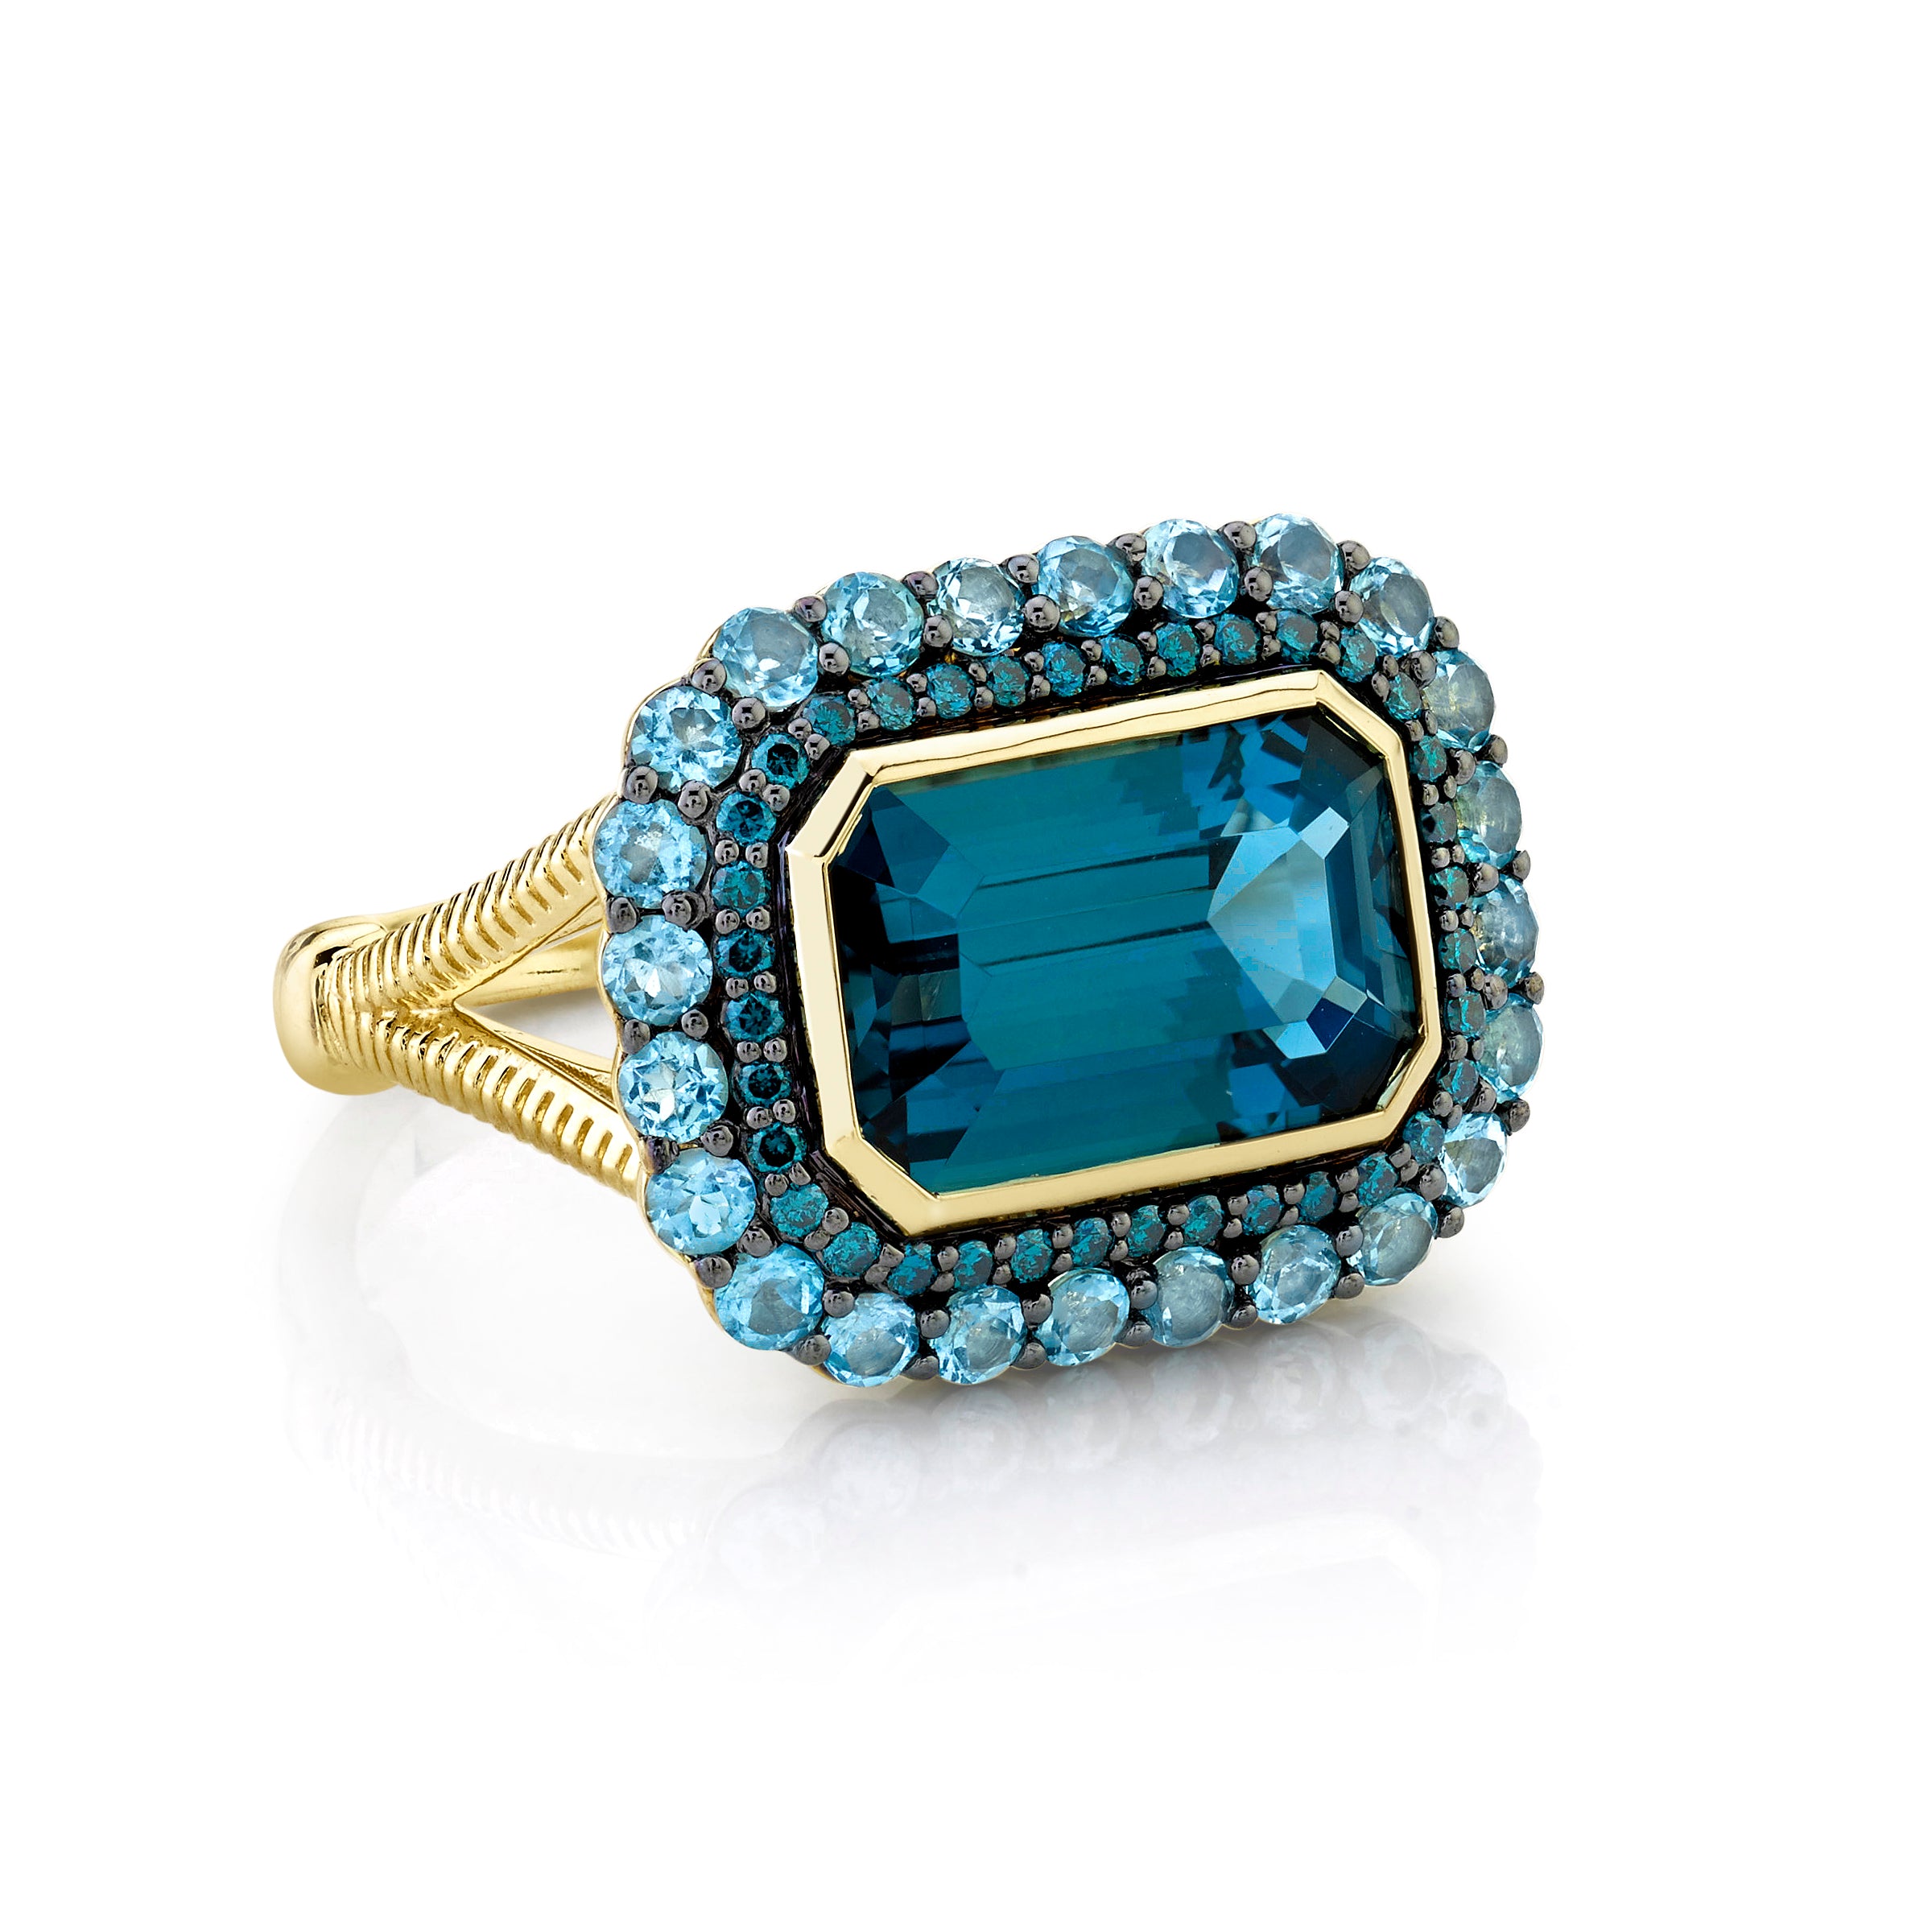 London Blue Topaz Ring with Blue Diamond and Swiss Blue Topaz Halos and Strie Shank